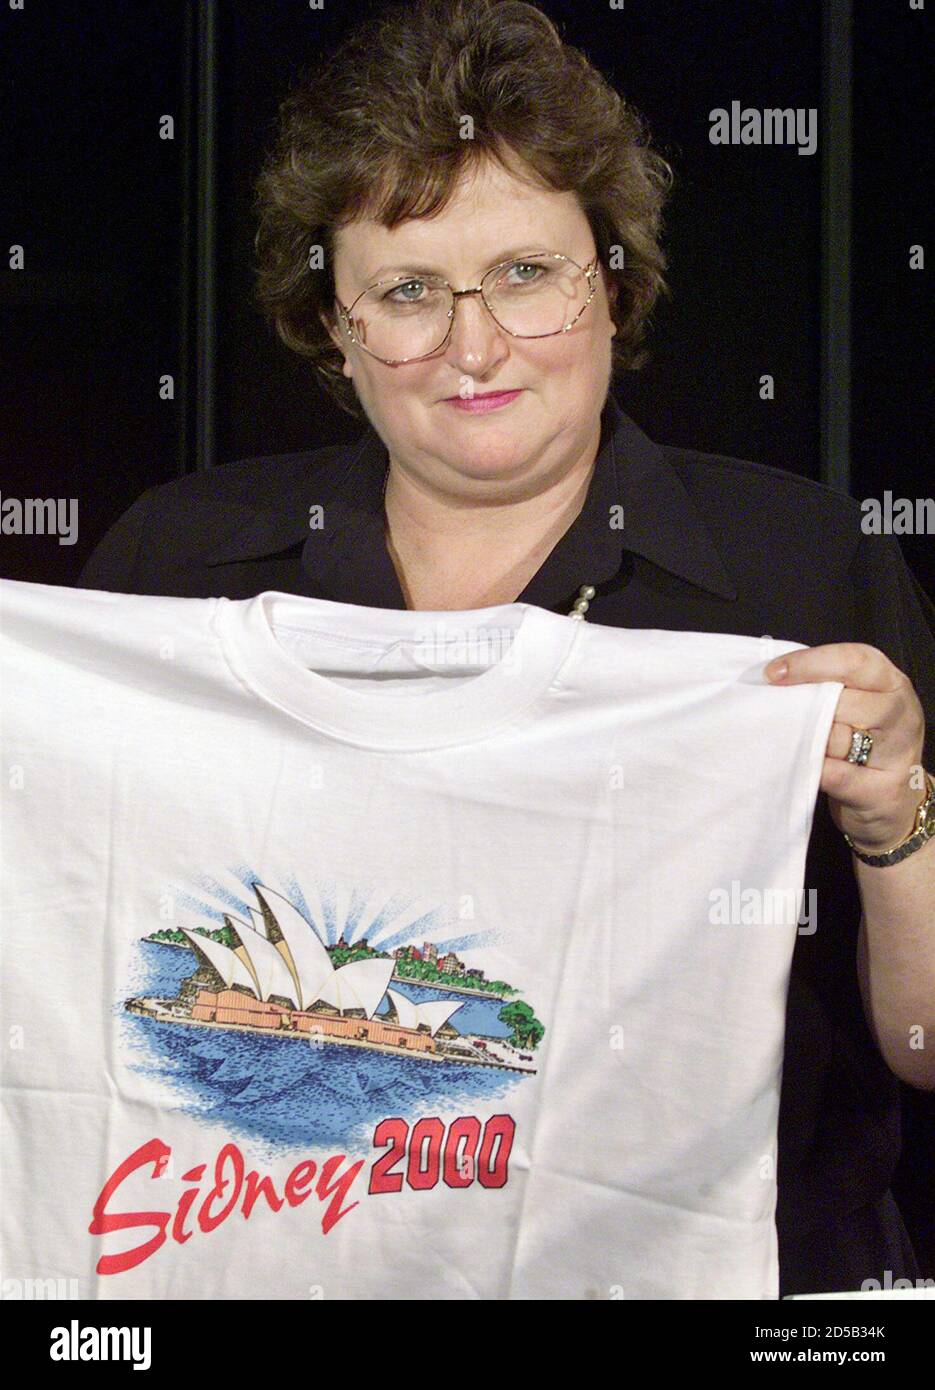 Amanda Vanstone, Australian Minister for Justice and Customs displays a  counterfeit t-shirt at a news conference February 24. With only months to  go before the Sydney 2000 Olympic Games, Australian customs is